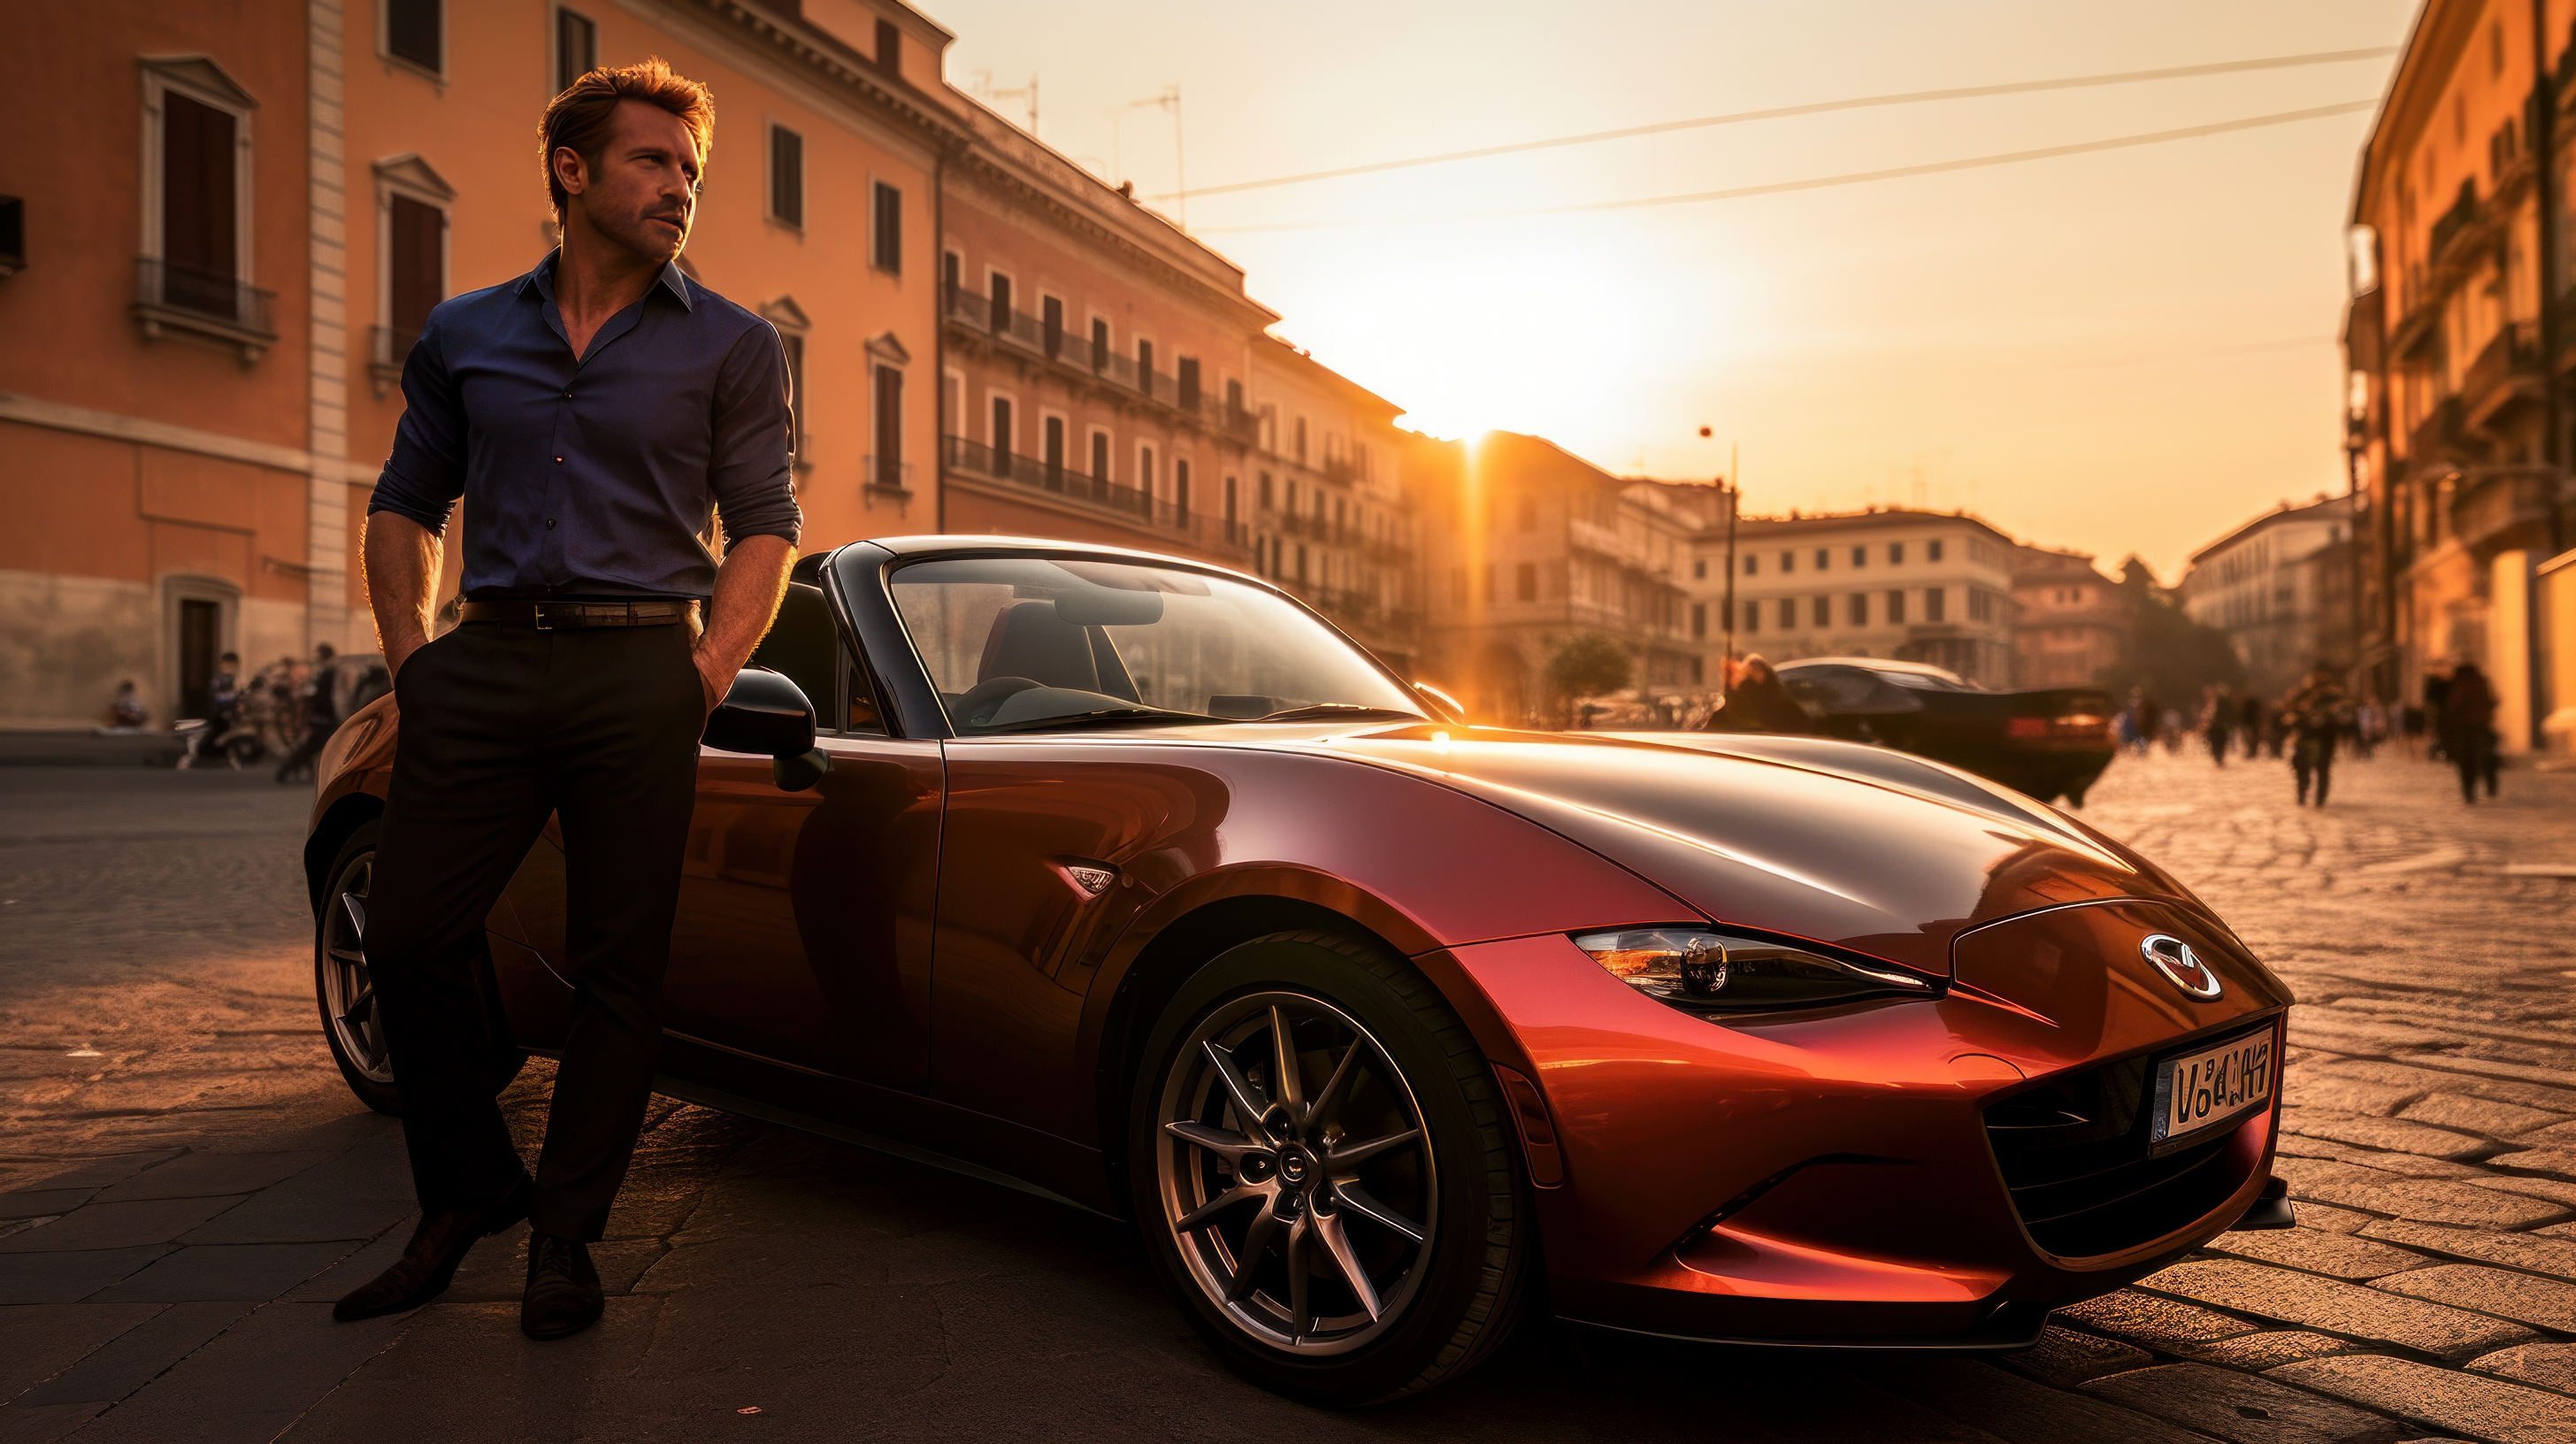 General 2912x1632 AI art Mazda men cobblestone golden hour Rome sports car sunset sunset glow hands in pockets looking away licence plates building architecture Mazda MX-5